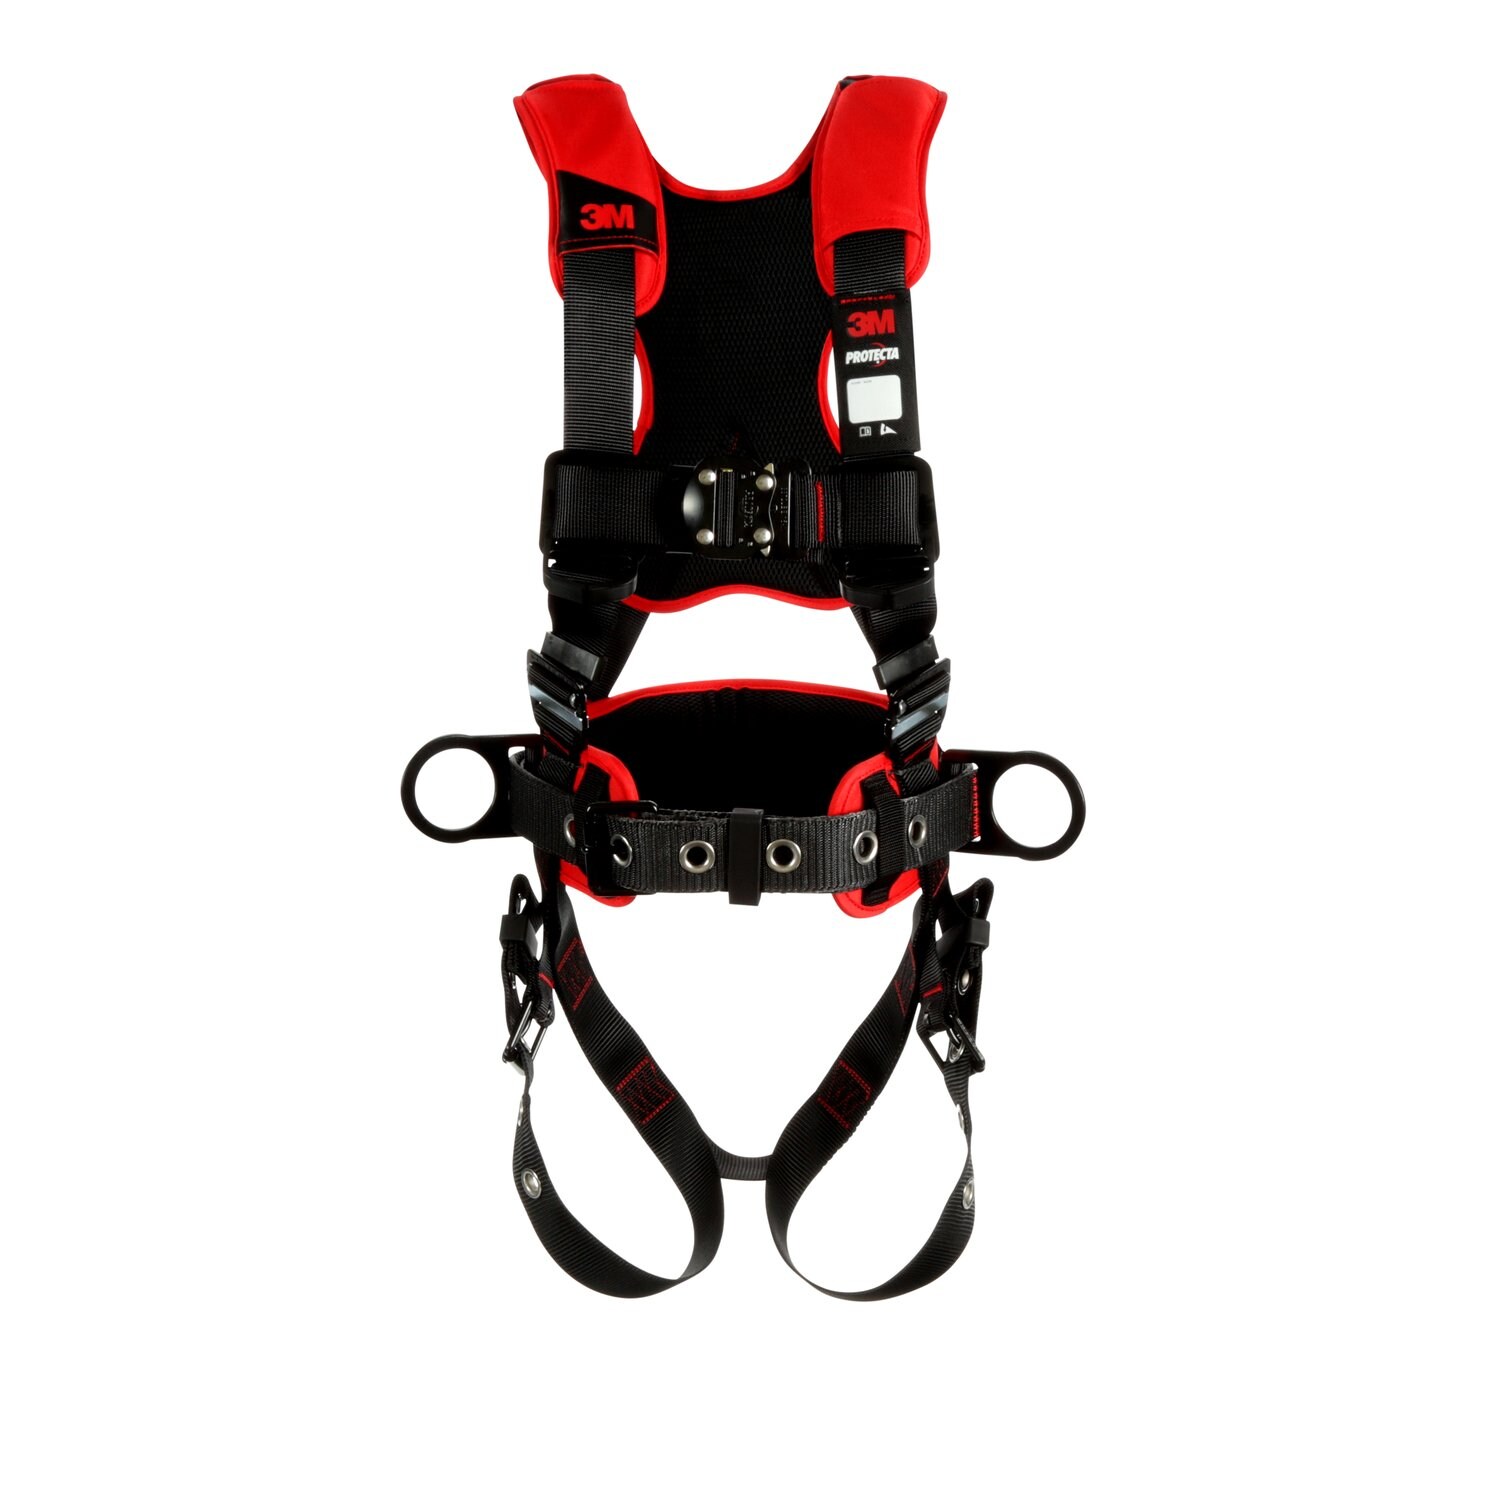 7012816620 - 3M Protecta P200 Comfort Construction Positioning Safety Harness 1161219, 2X